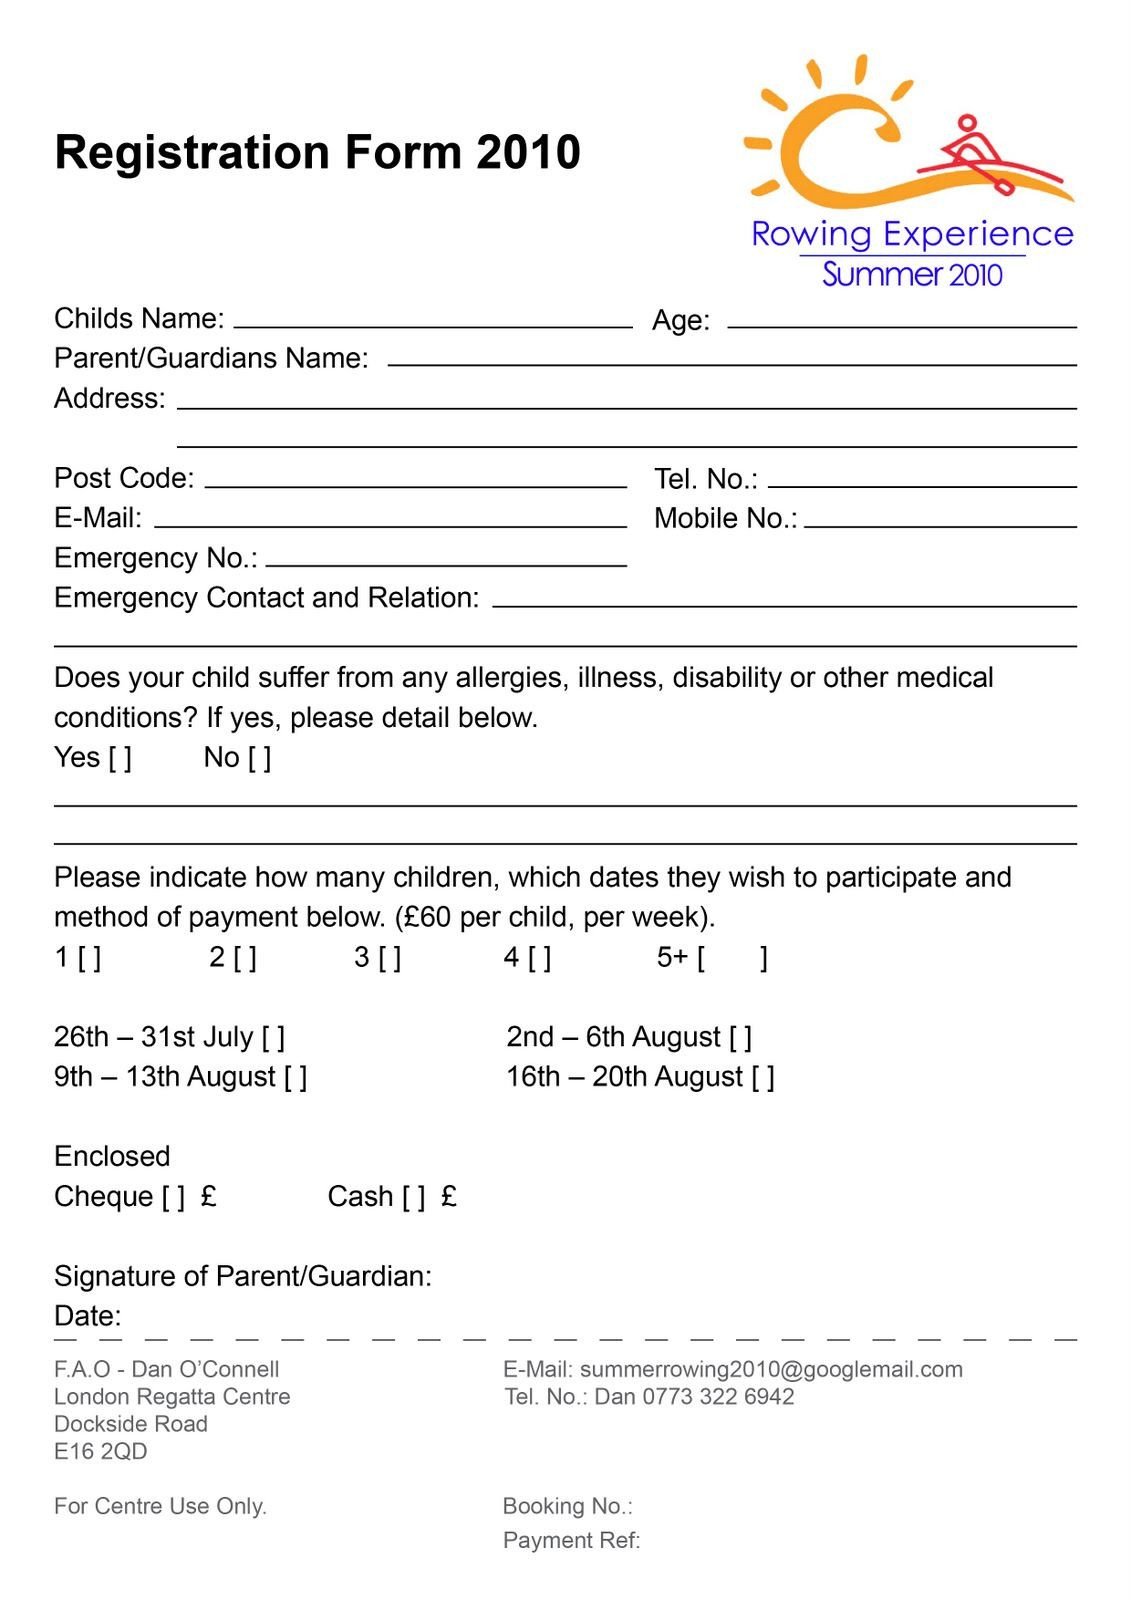 Camp Registration forms Love to Camp Here are some Great Tips